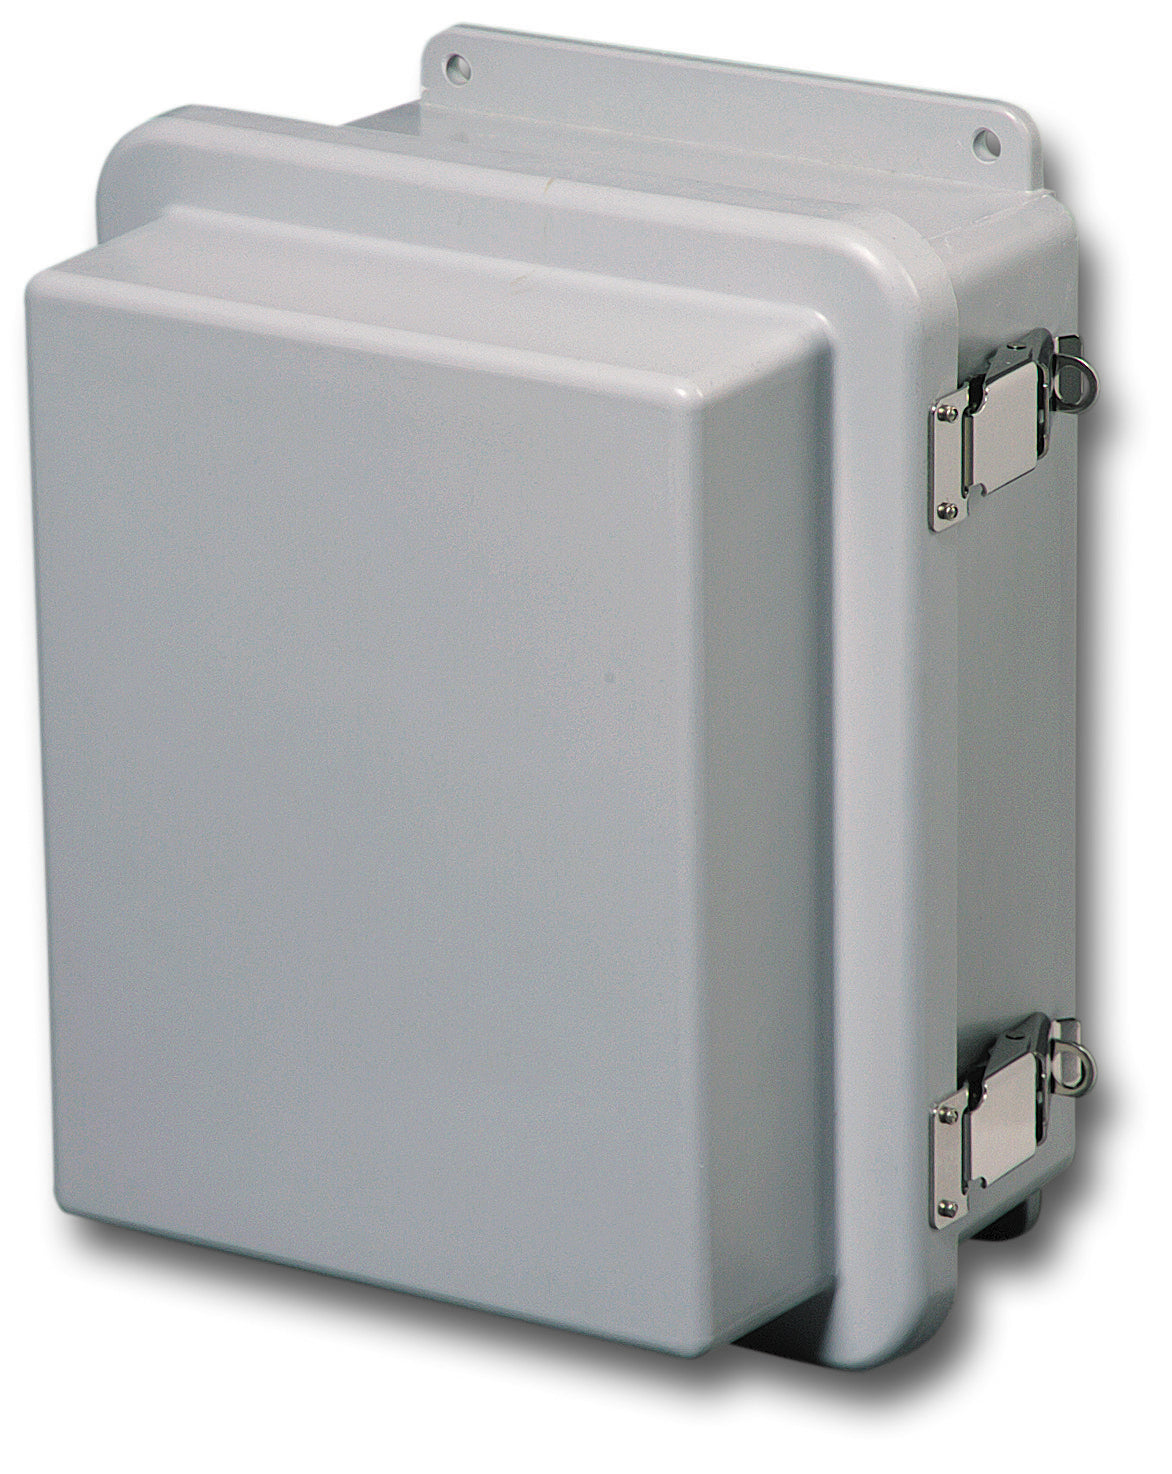 N4X   FG   RCHQR Series     Fiberglass Enclosures with Raised Hinged Cover and Quick Release Latch